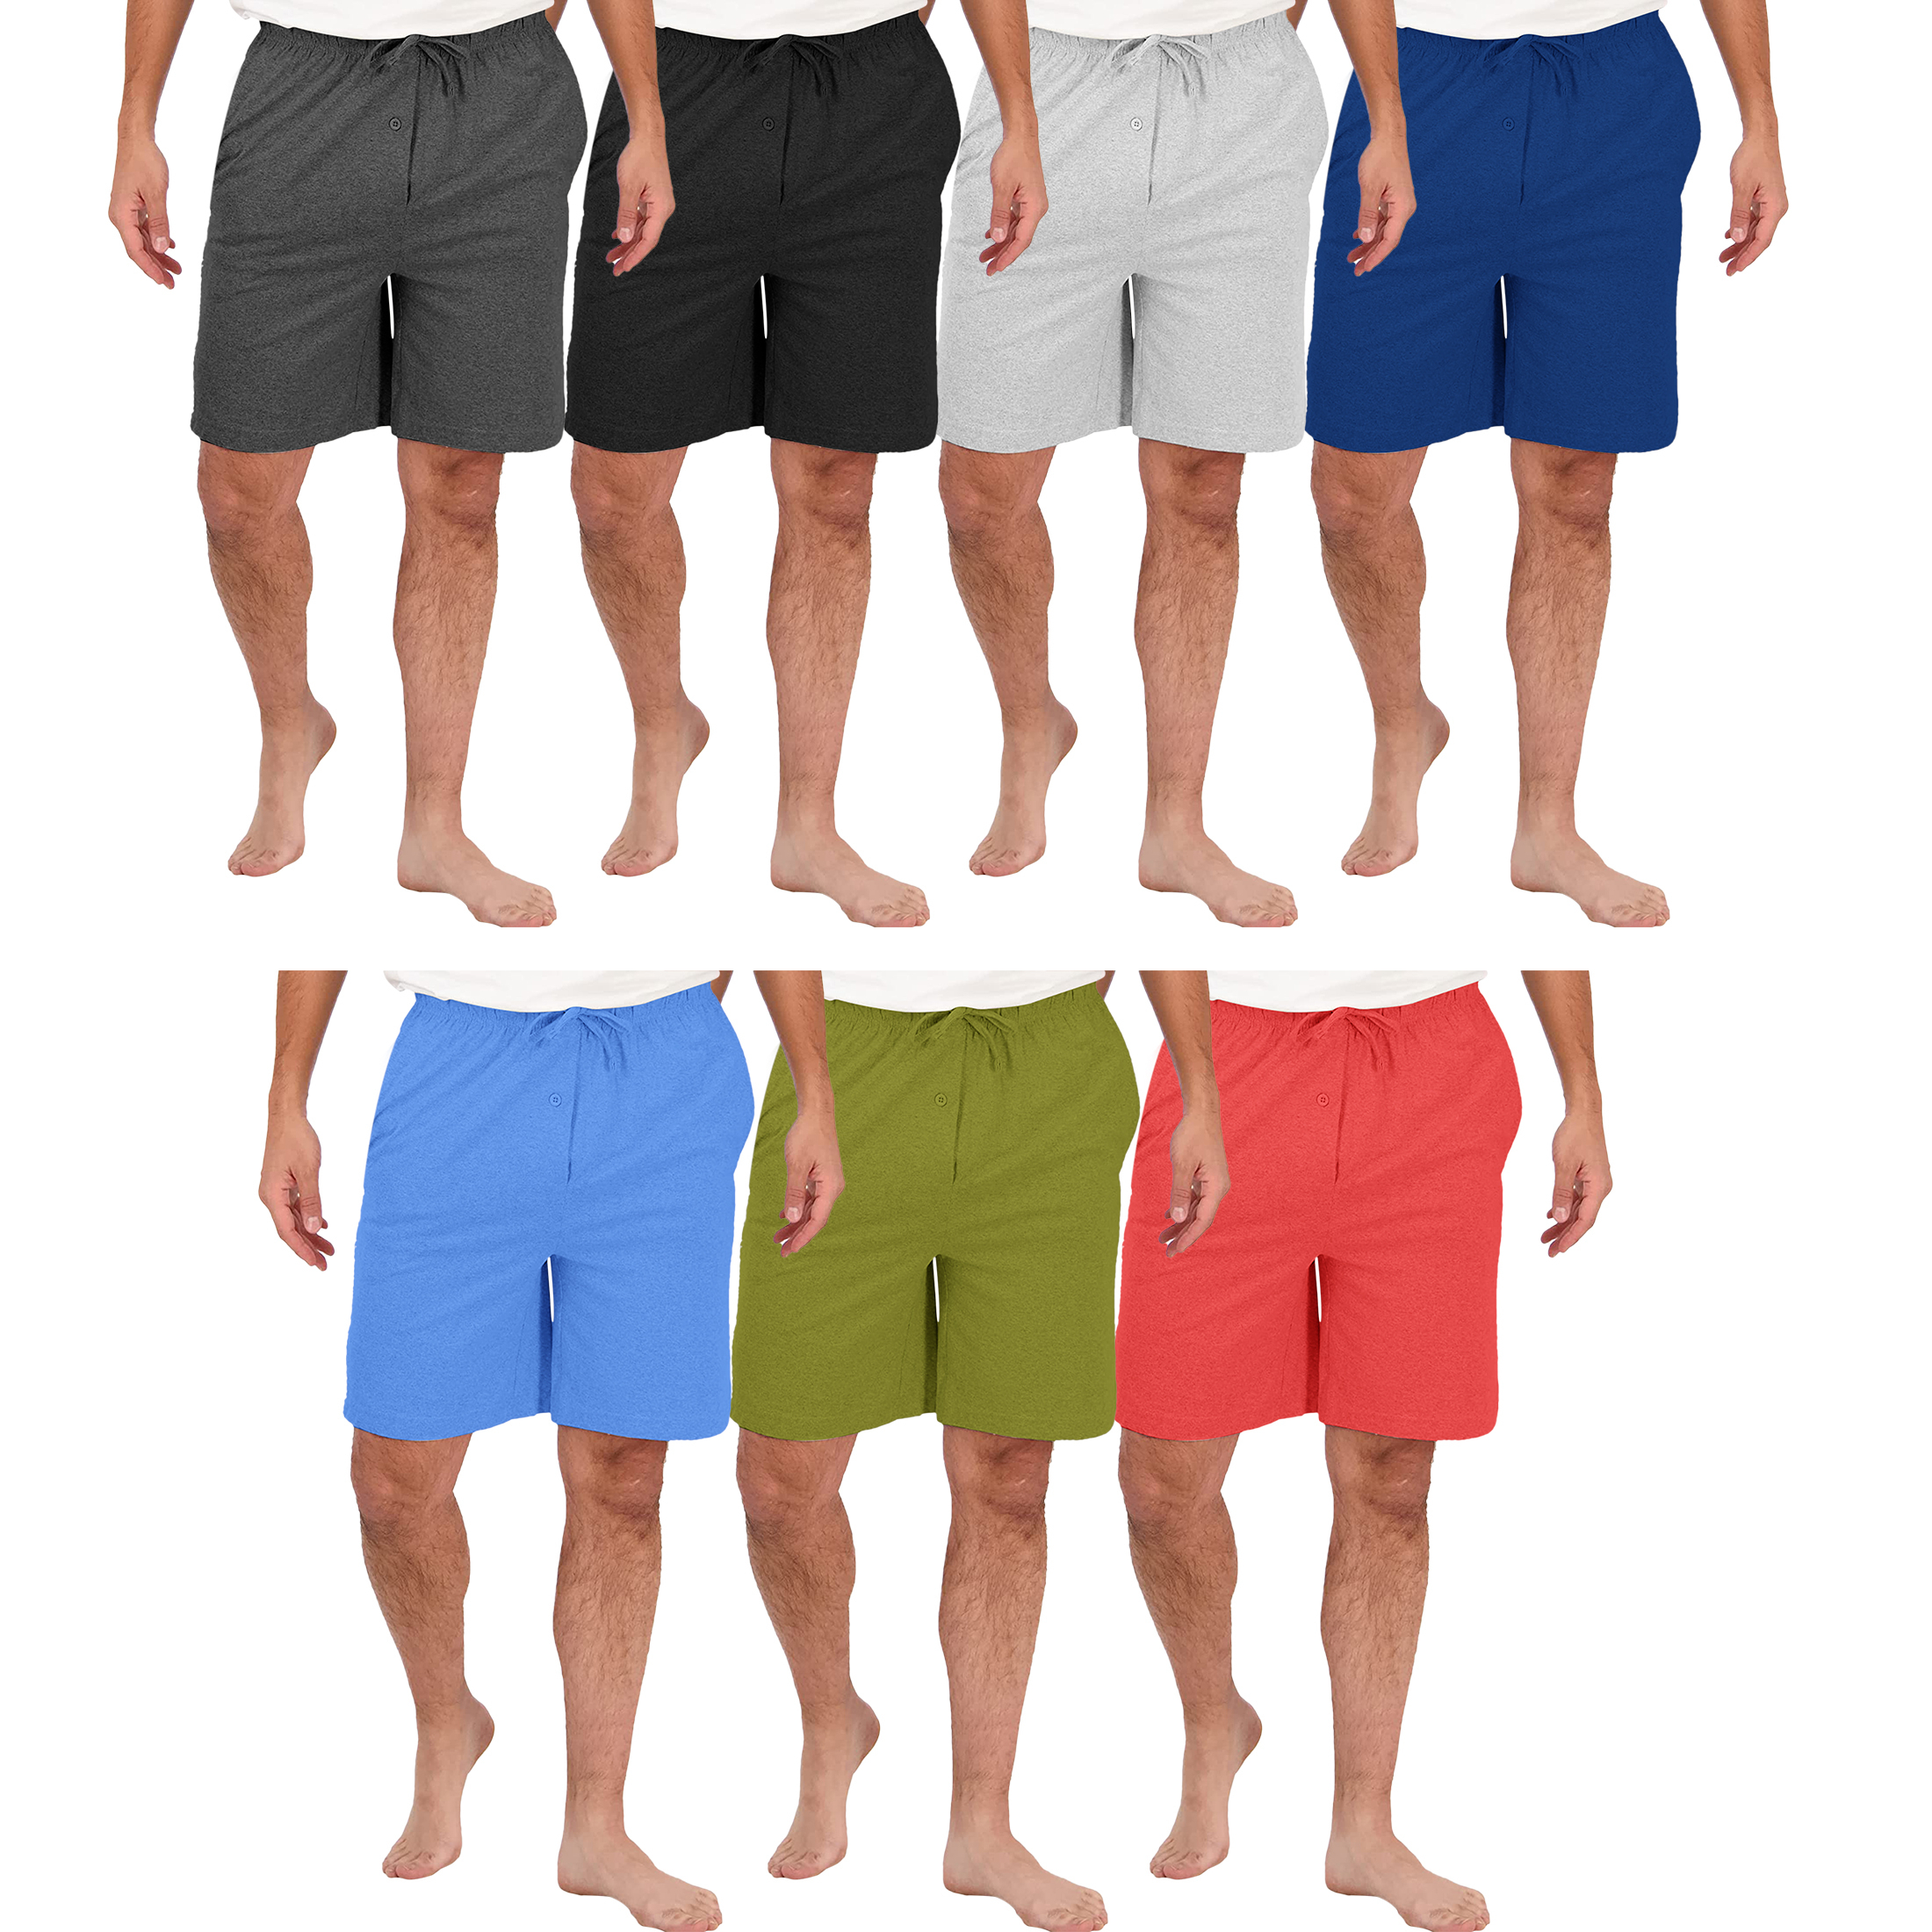 Multi-Pack: Men's Ultra-Soft Jersey Knit Sleep Lounge Pajama Shorts For Sleepwear - Solid, 1 Pack, Small